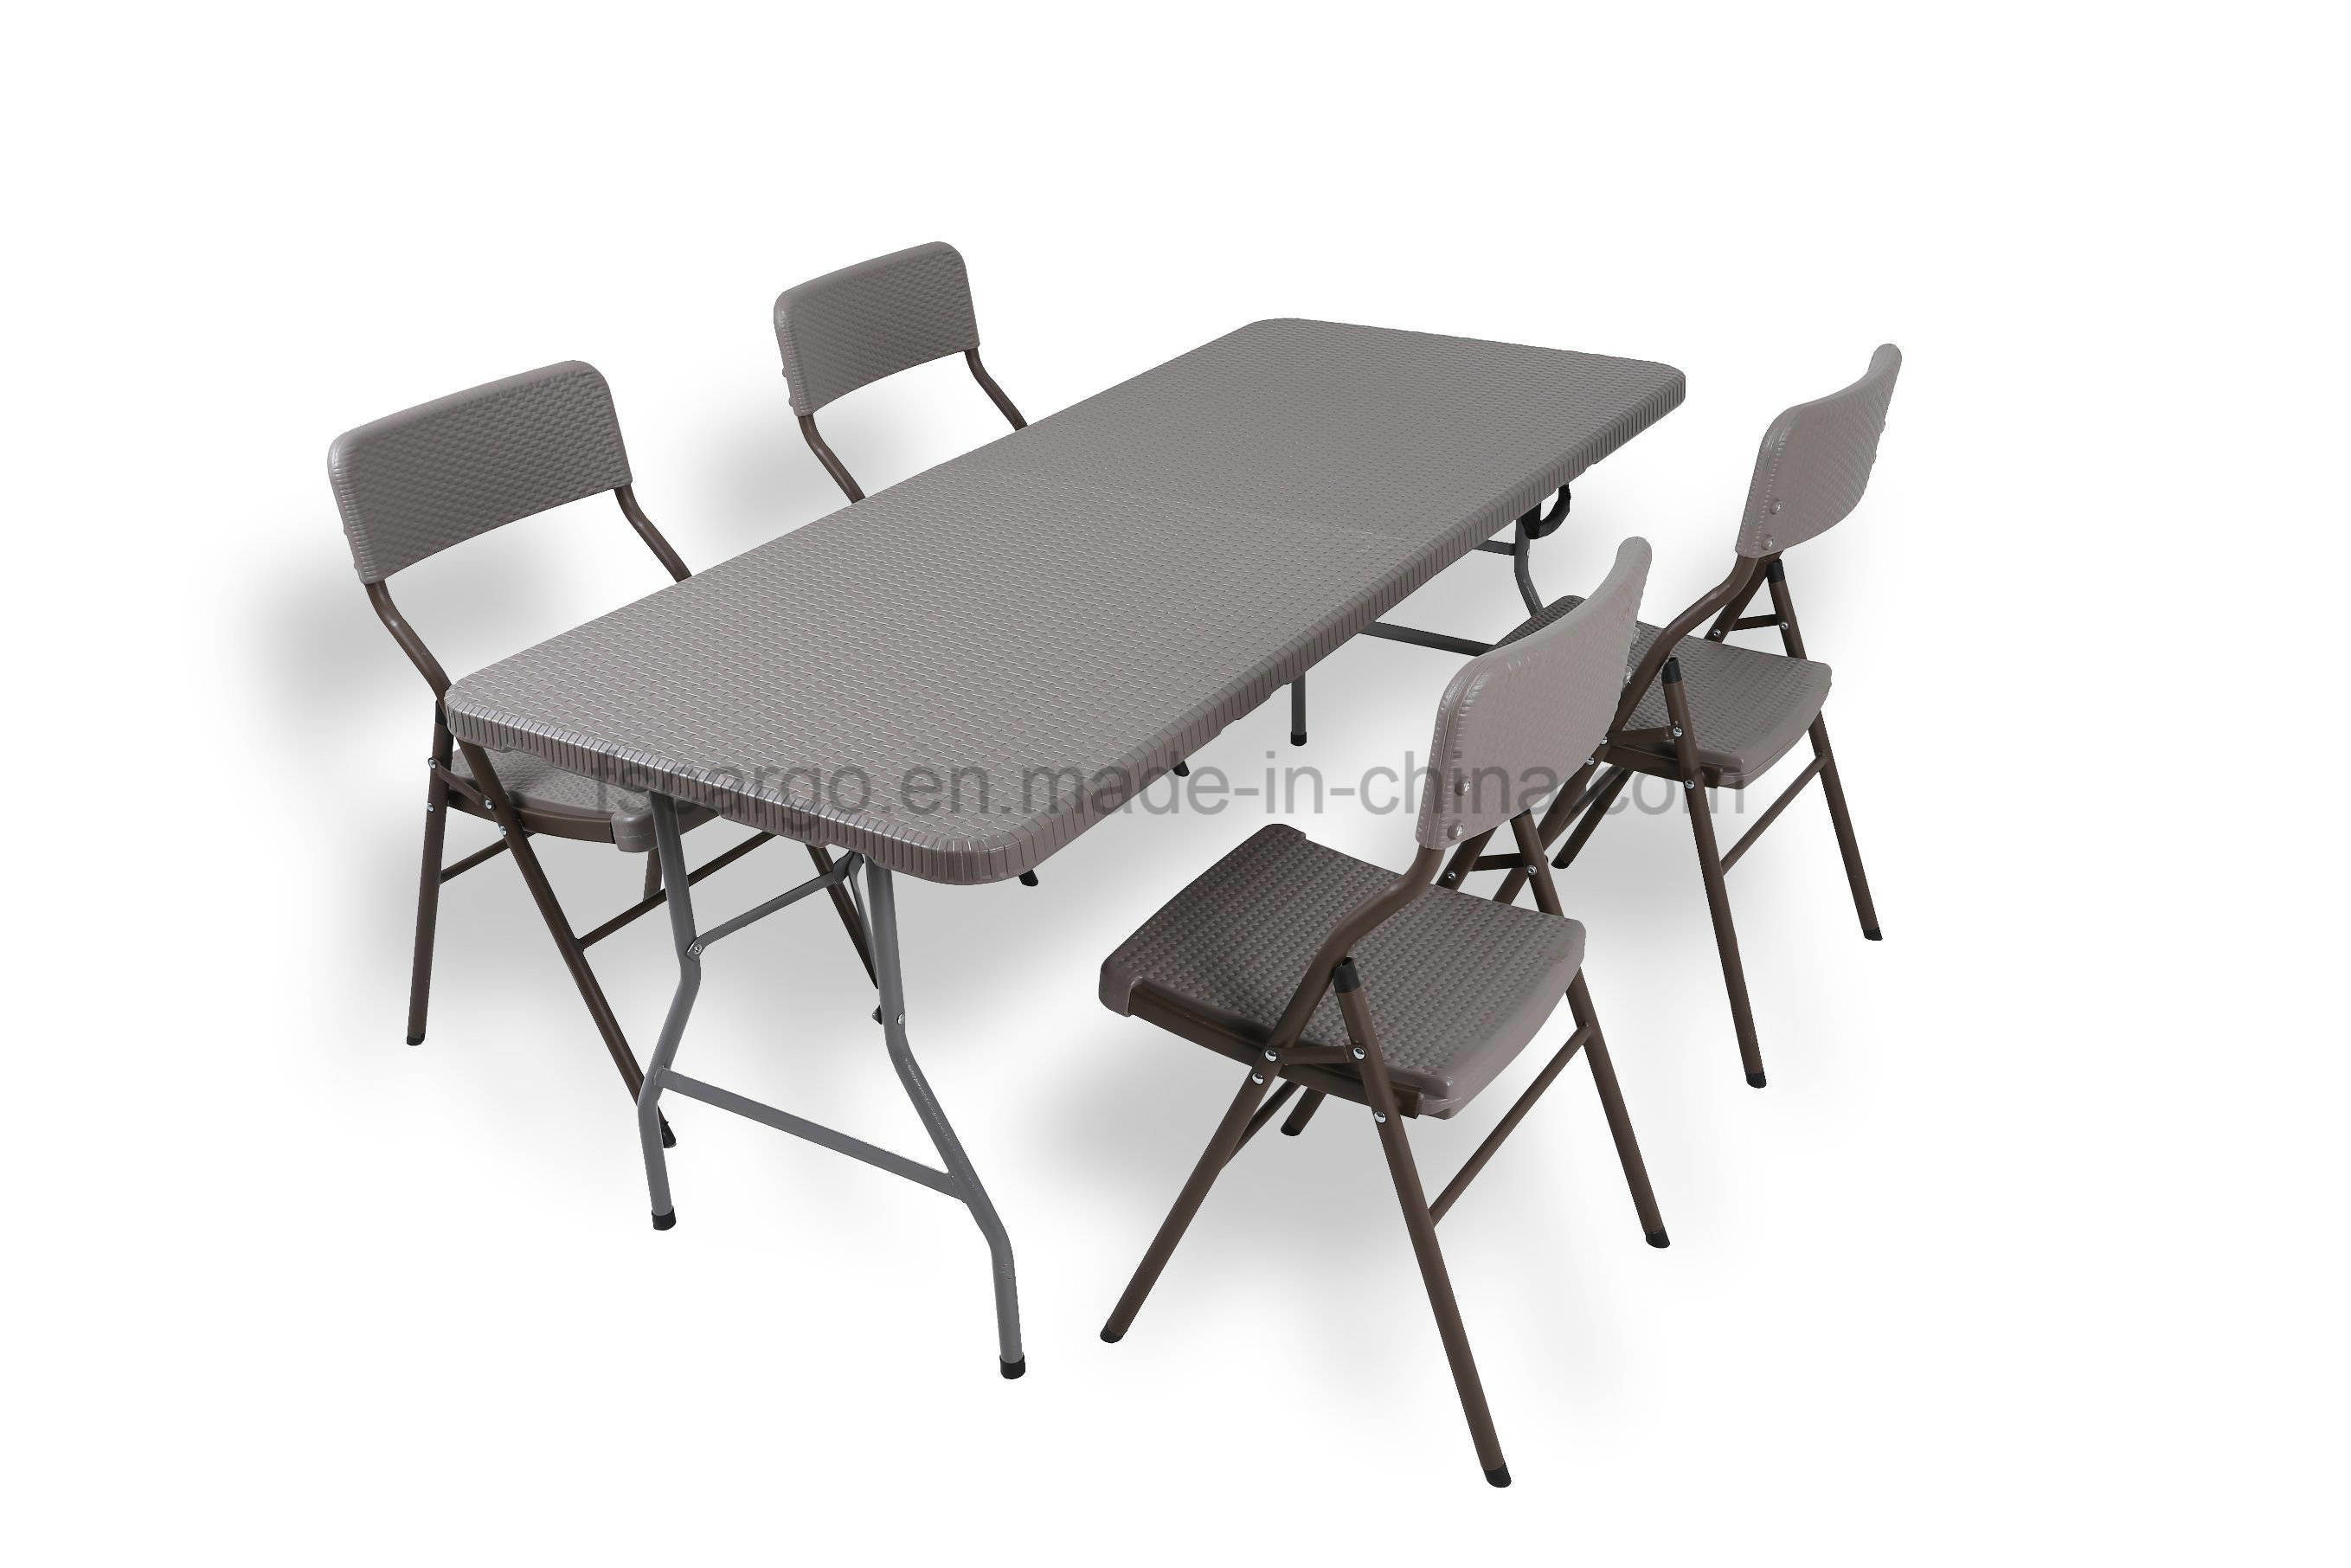 Imitated Rattan Finished Folding Table and Chair for Wholesale (CG-R180-2 & CG-R53-1)